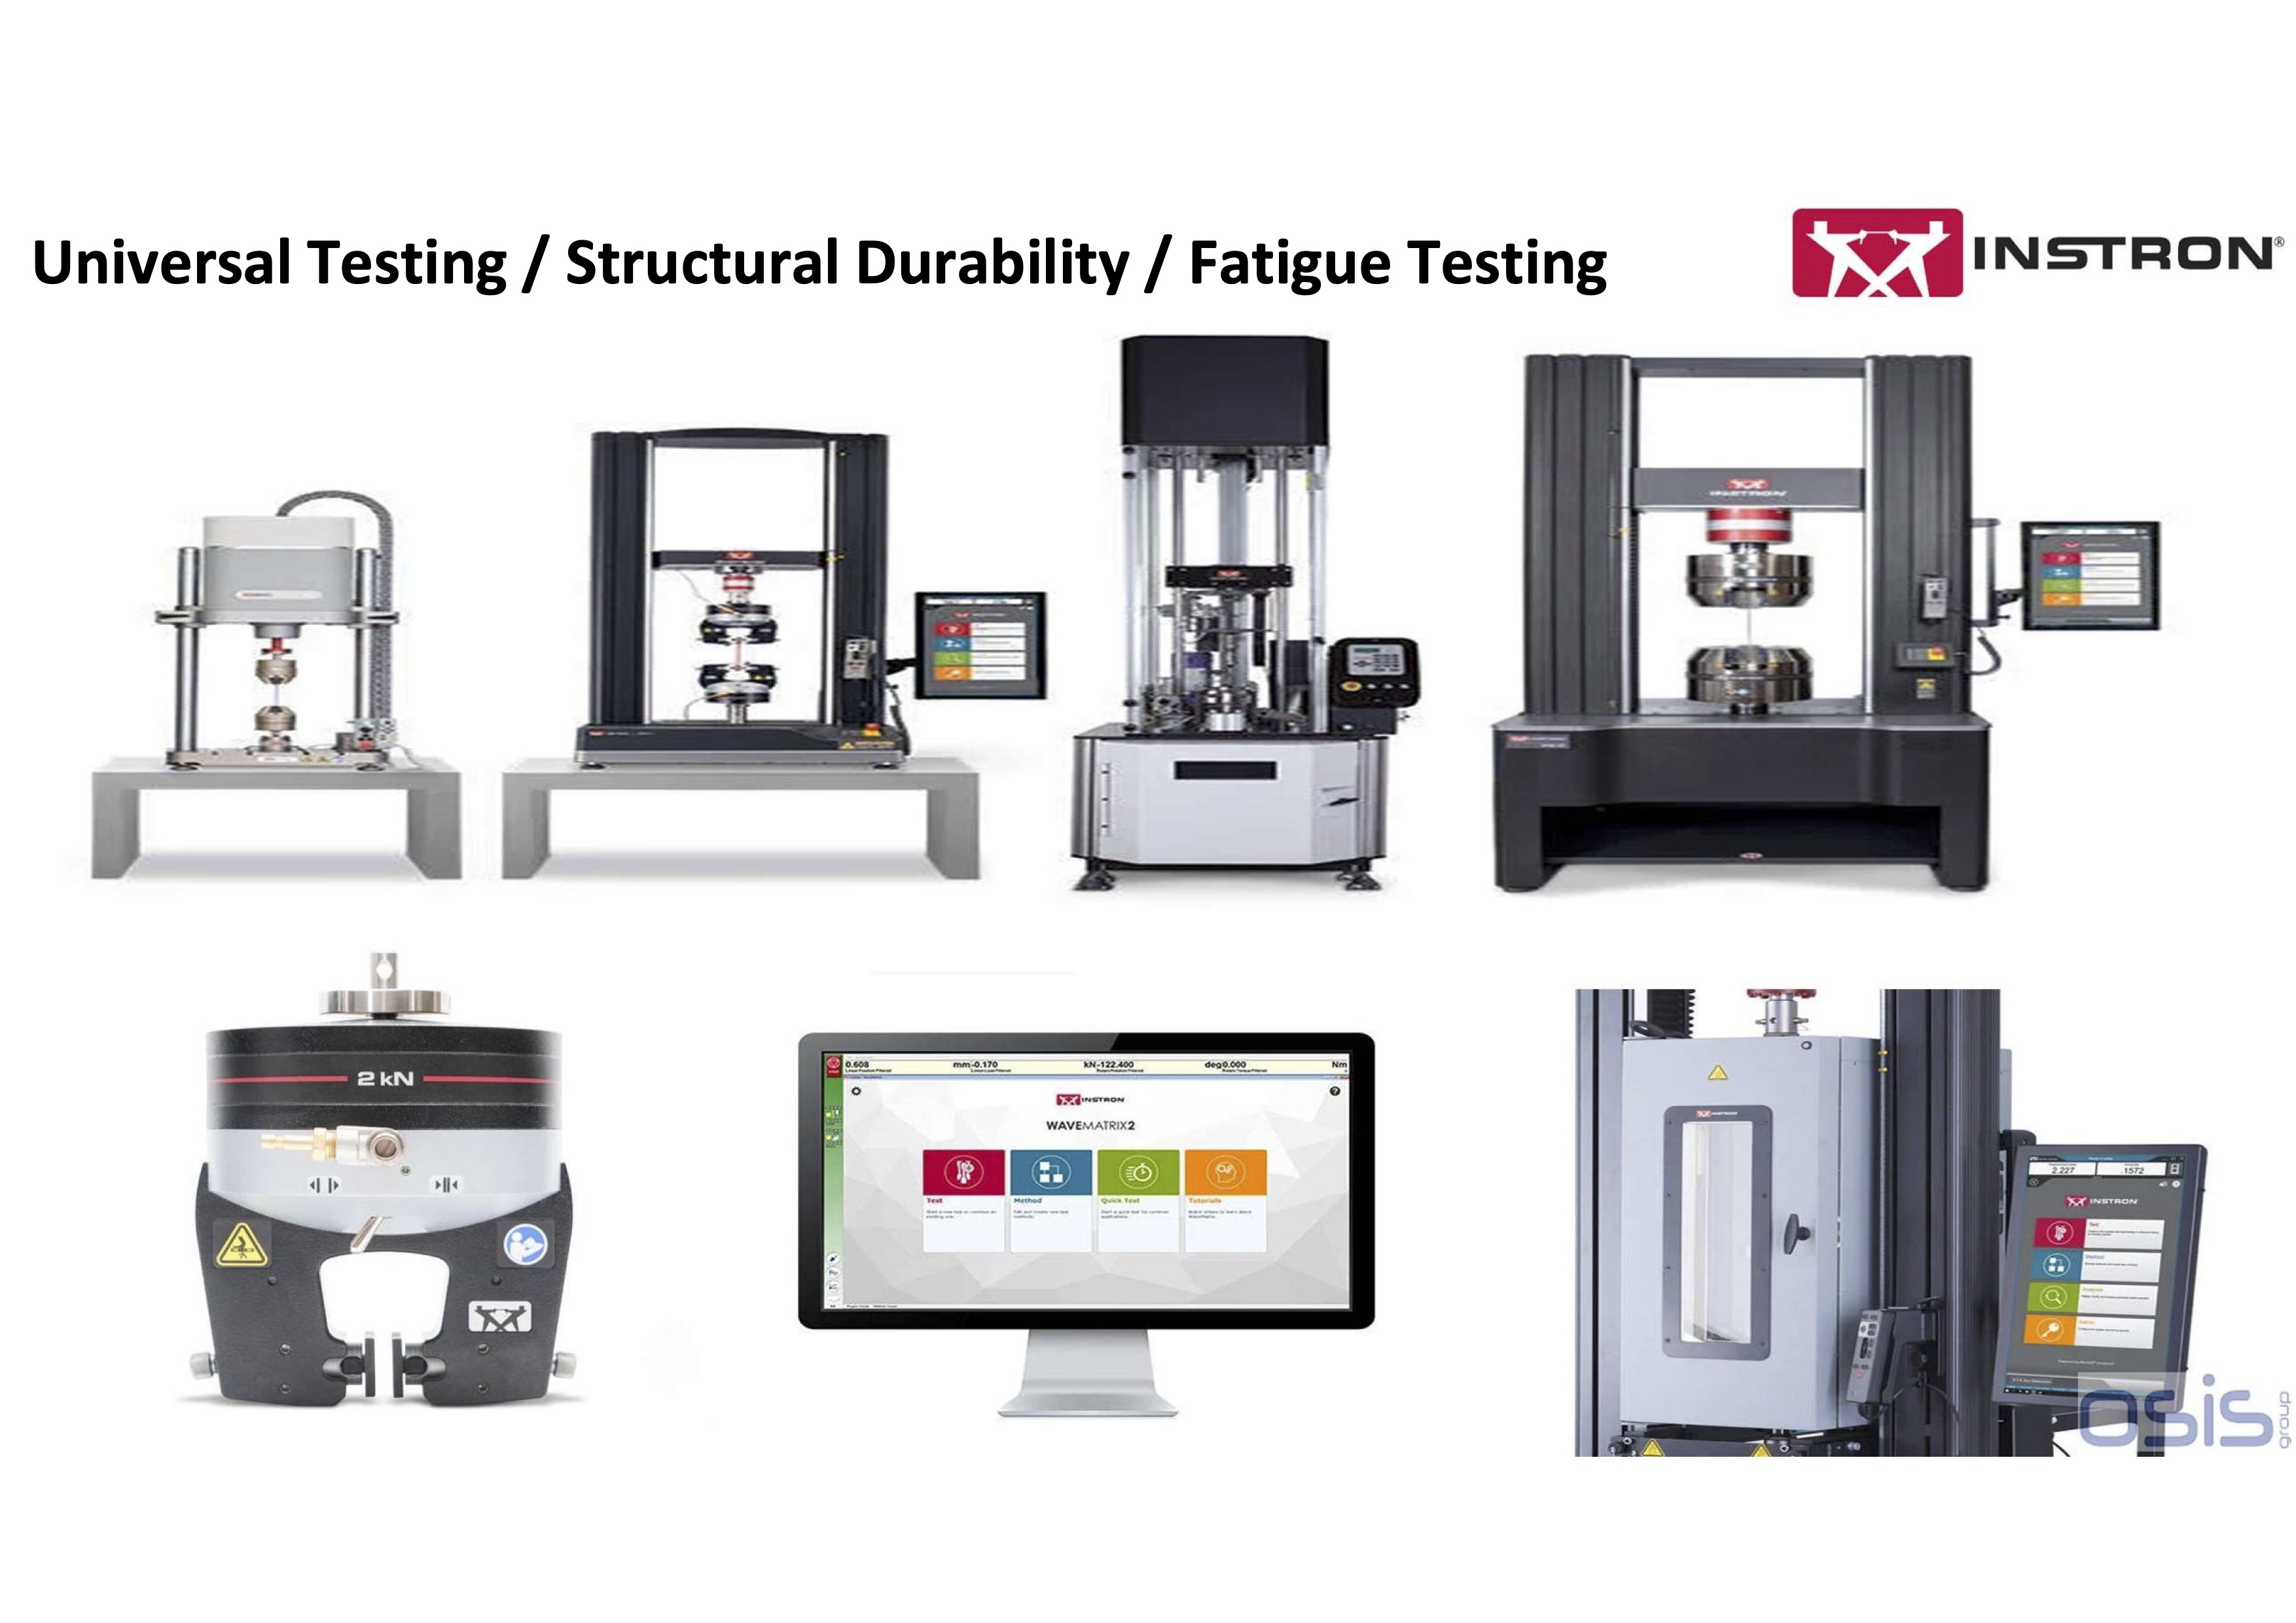 Universal Testing / Structural Durability / Fatigue Testing